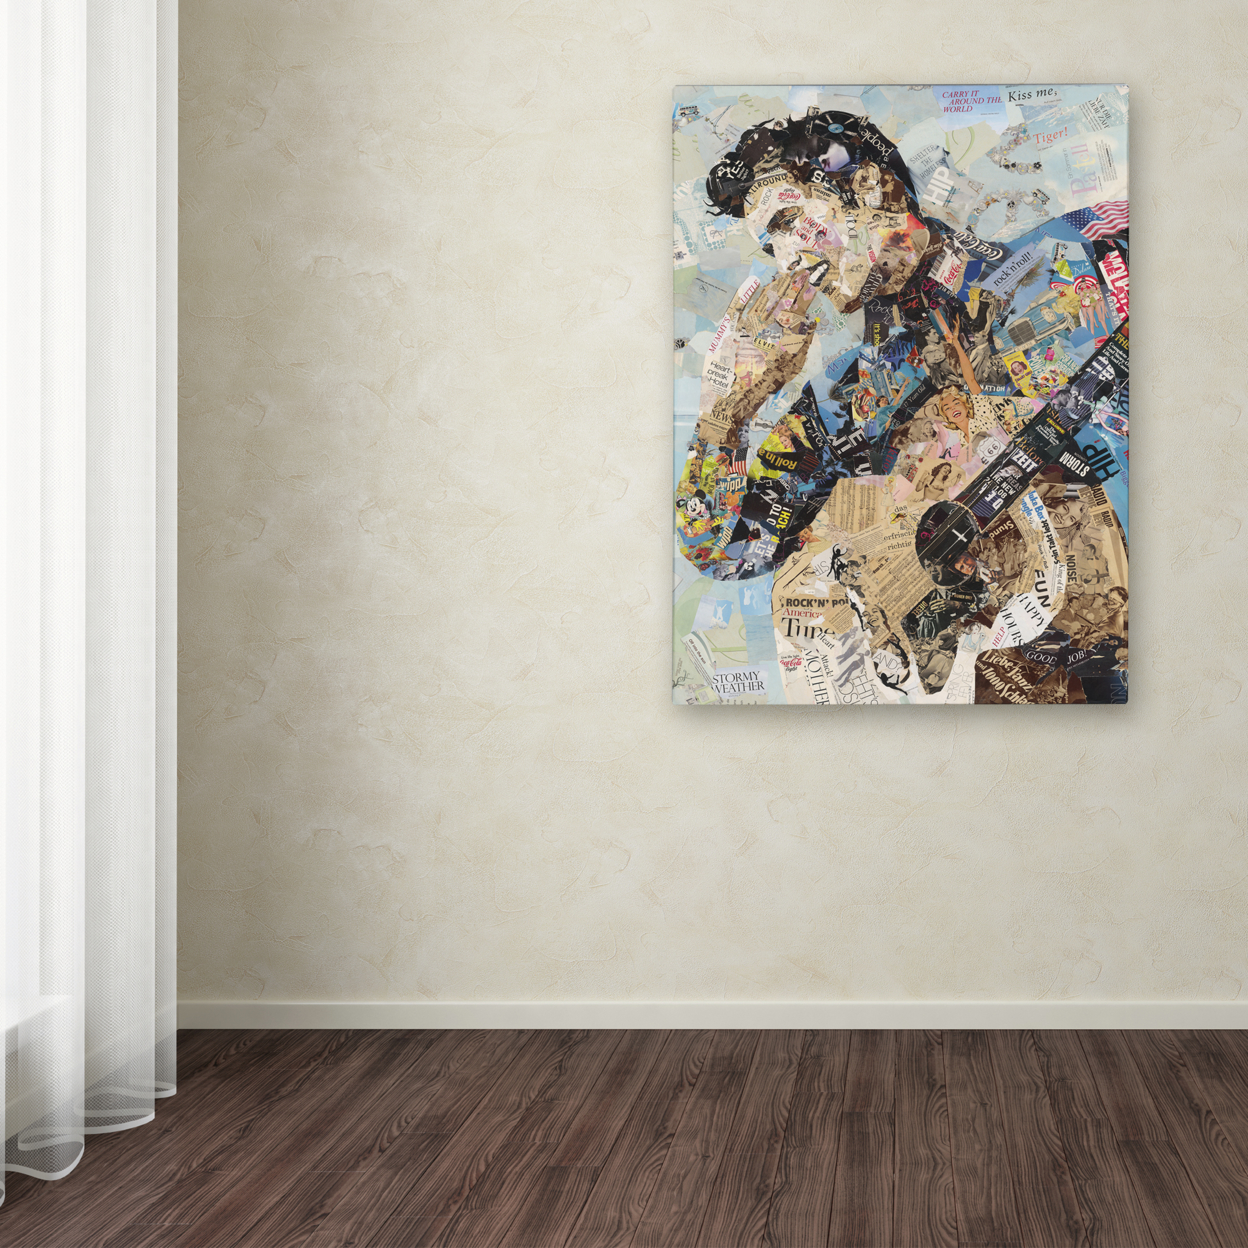 Ines Kouidis 'All Shook Up' Canvas Wall Art 35 X 47 Inches